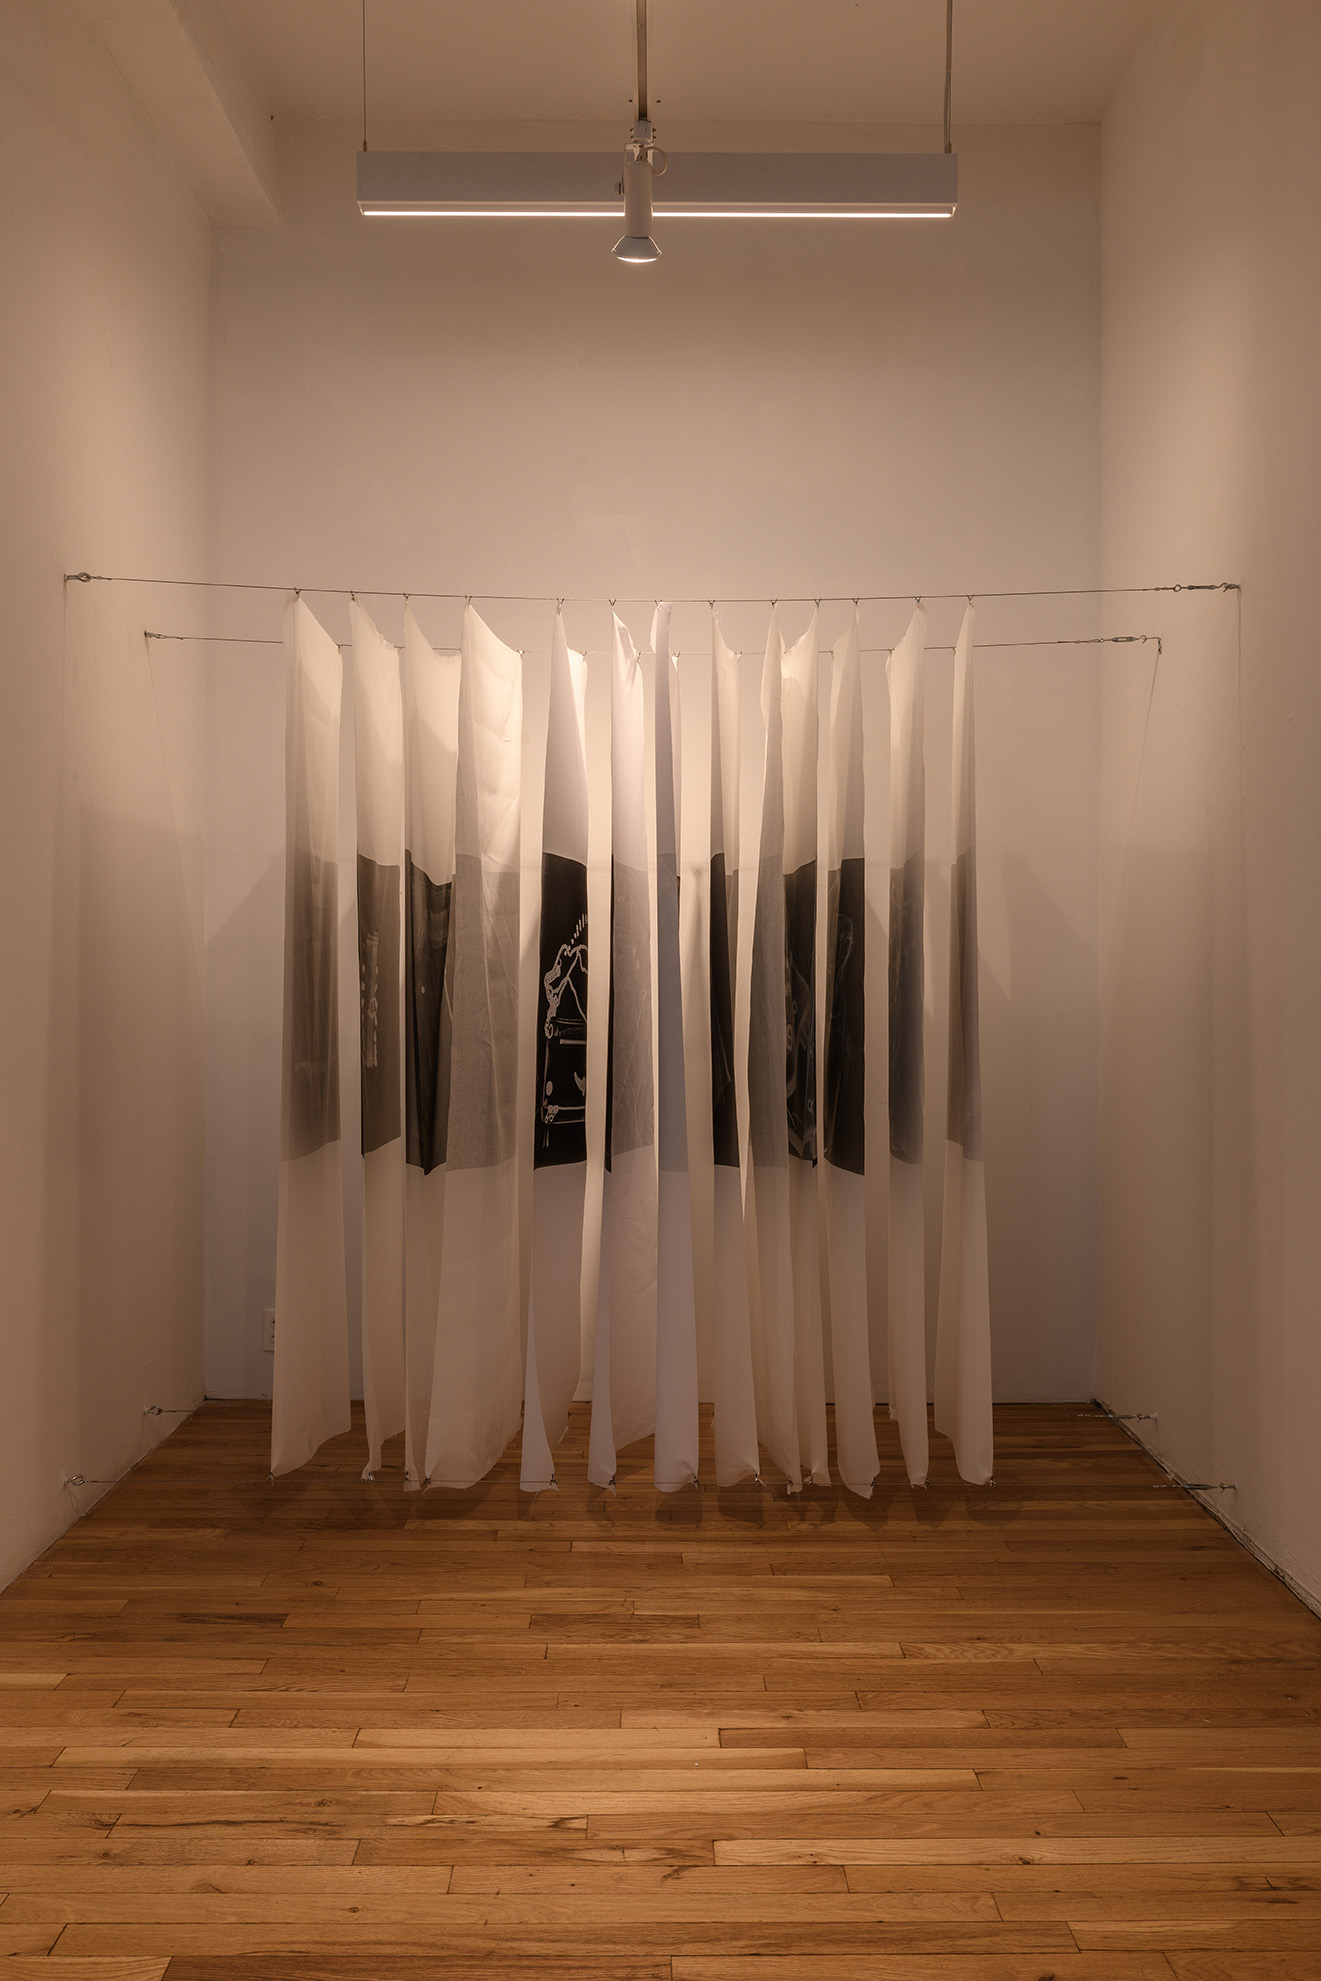 [In an alcove of the gallery, orderly sheets of silk are held in an evenly spaced stack like slices of bread. An X-ray image of clothing or fashion accessories is printed in a dark rectangle at the center of each sheet. One of the sheets folds open and reveals an x-ray of a handbag. The metal fixtures on the bag stand out as bright white zippers and chains as the fibrous material of the bag blends with the black background of the image.]